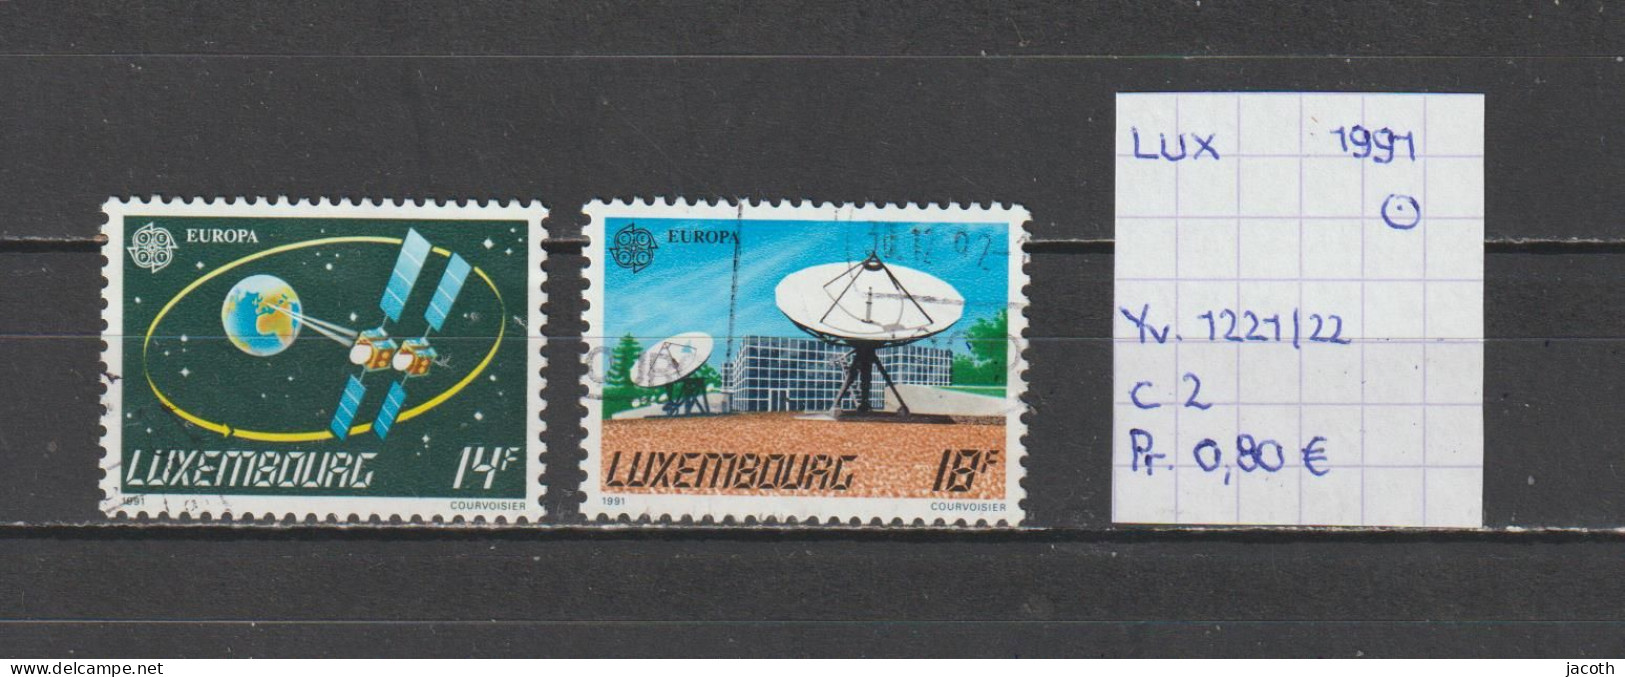 (TJ) Luxembourg 1991 - YT 1221/22 (gest./obl./used) - Gebraucht